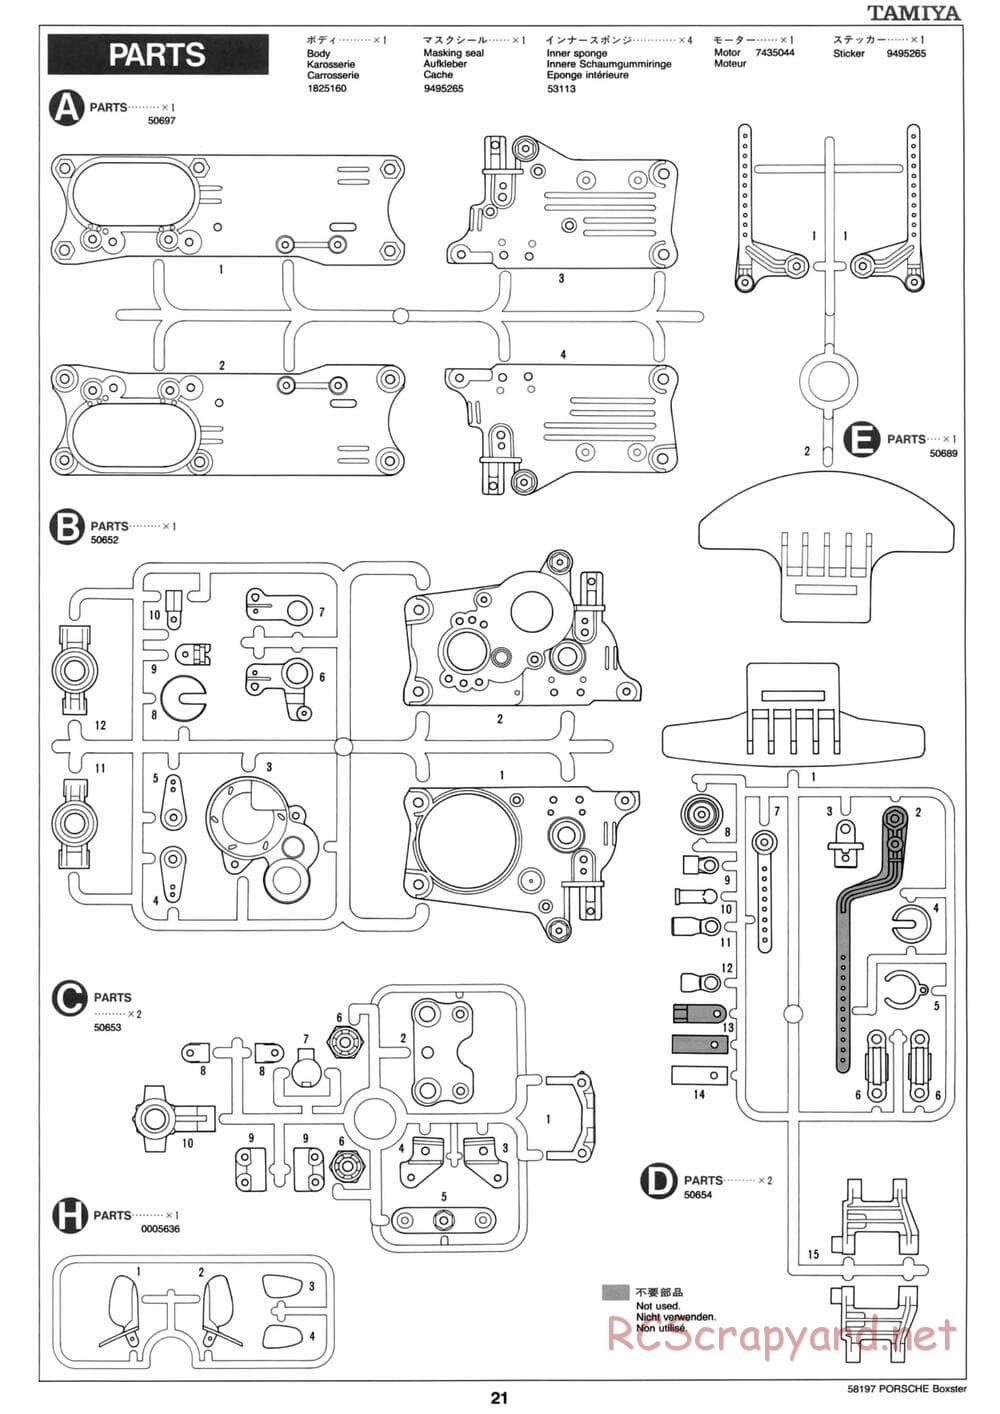 Tamiya - Porsche Boxster - M02L Chassis - Manual - Page 21